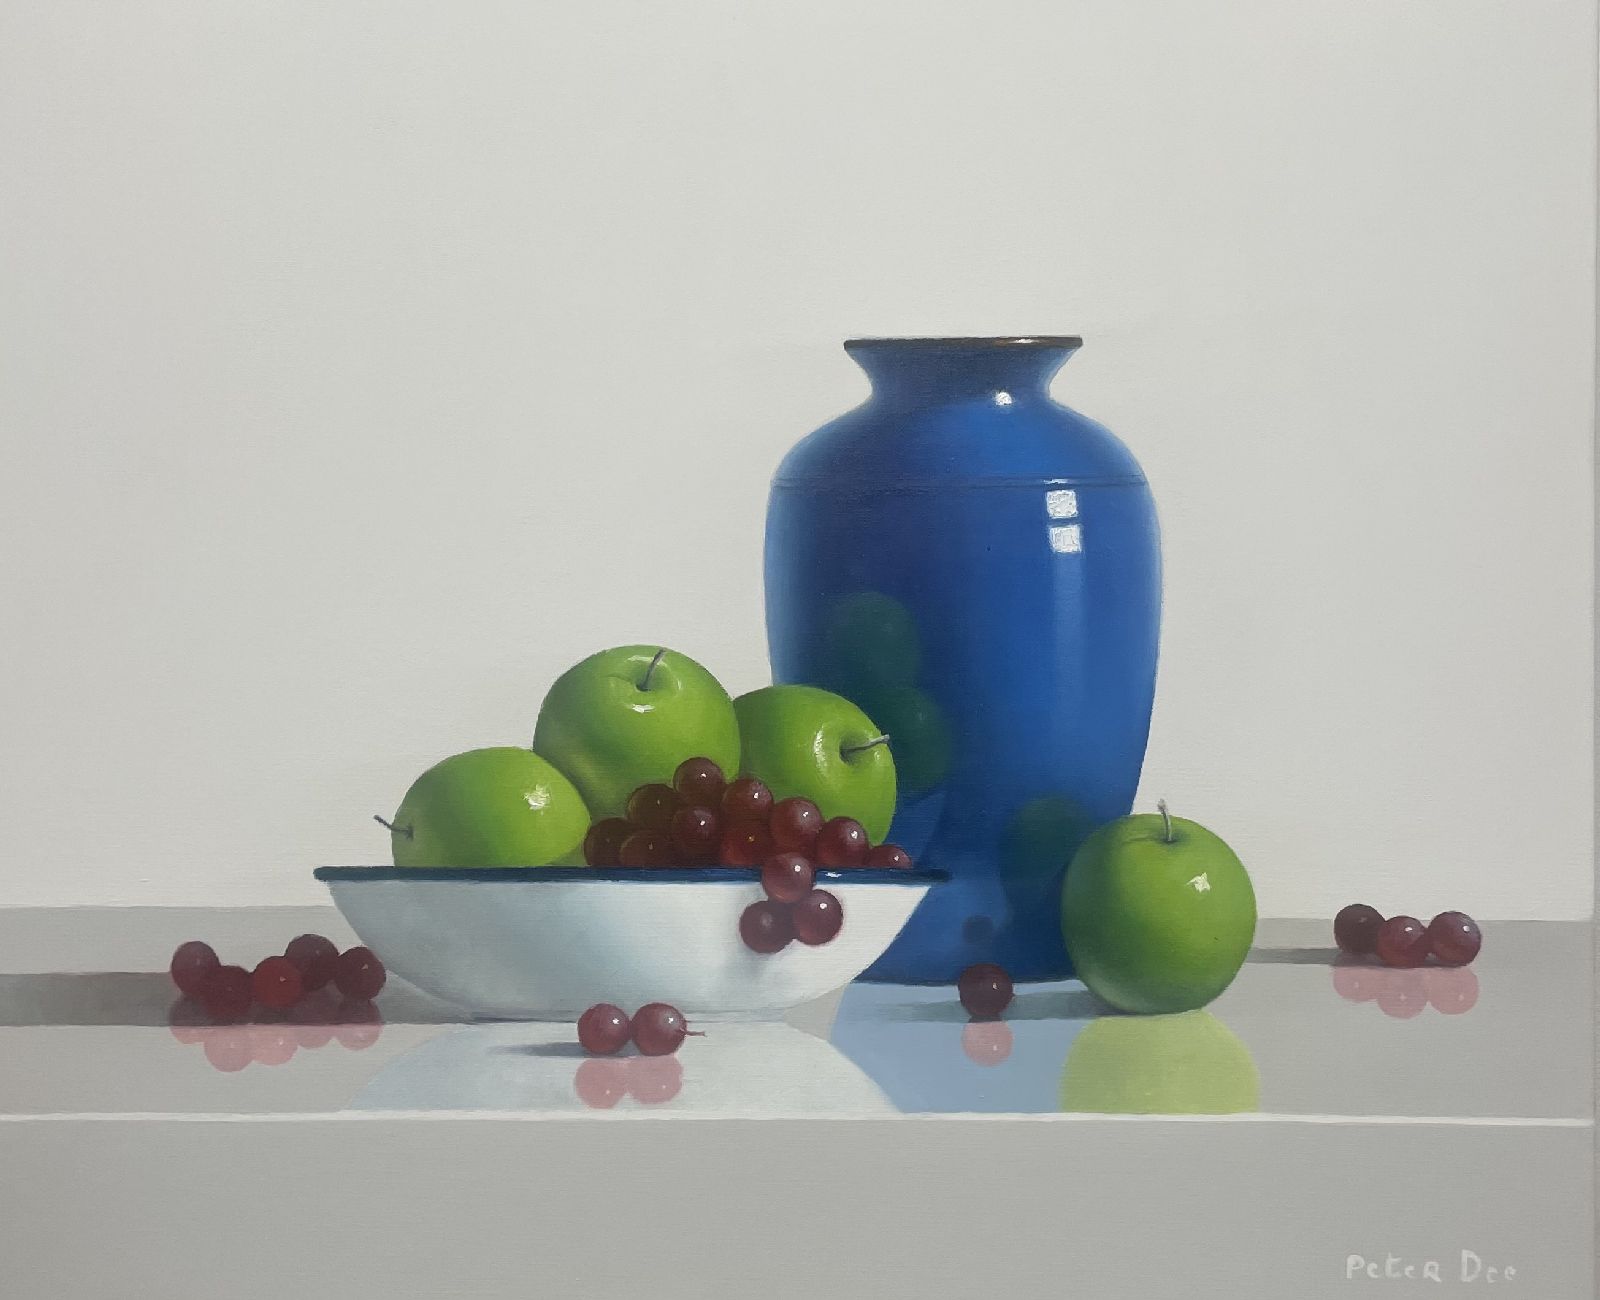 Blue Vase and White Bowl with Apples and Grapes by Peter Dee